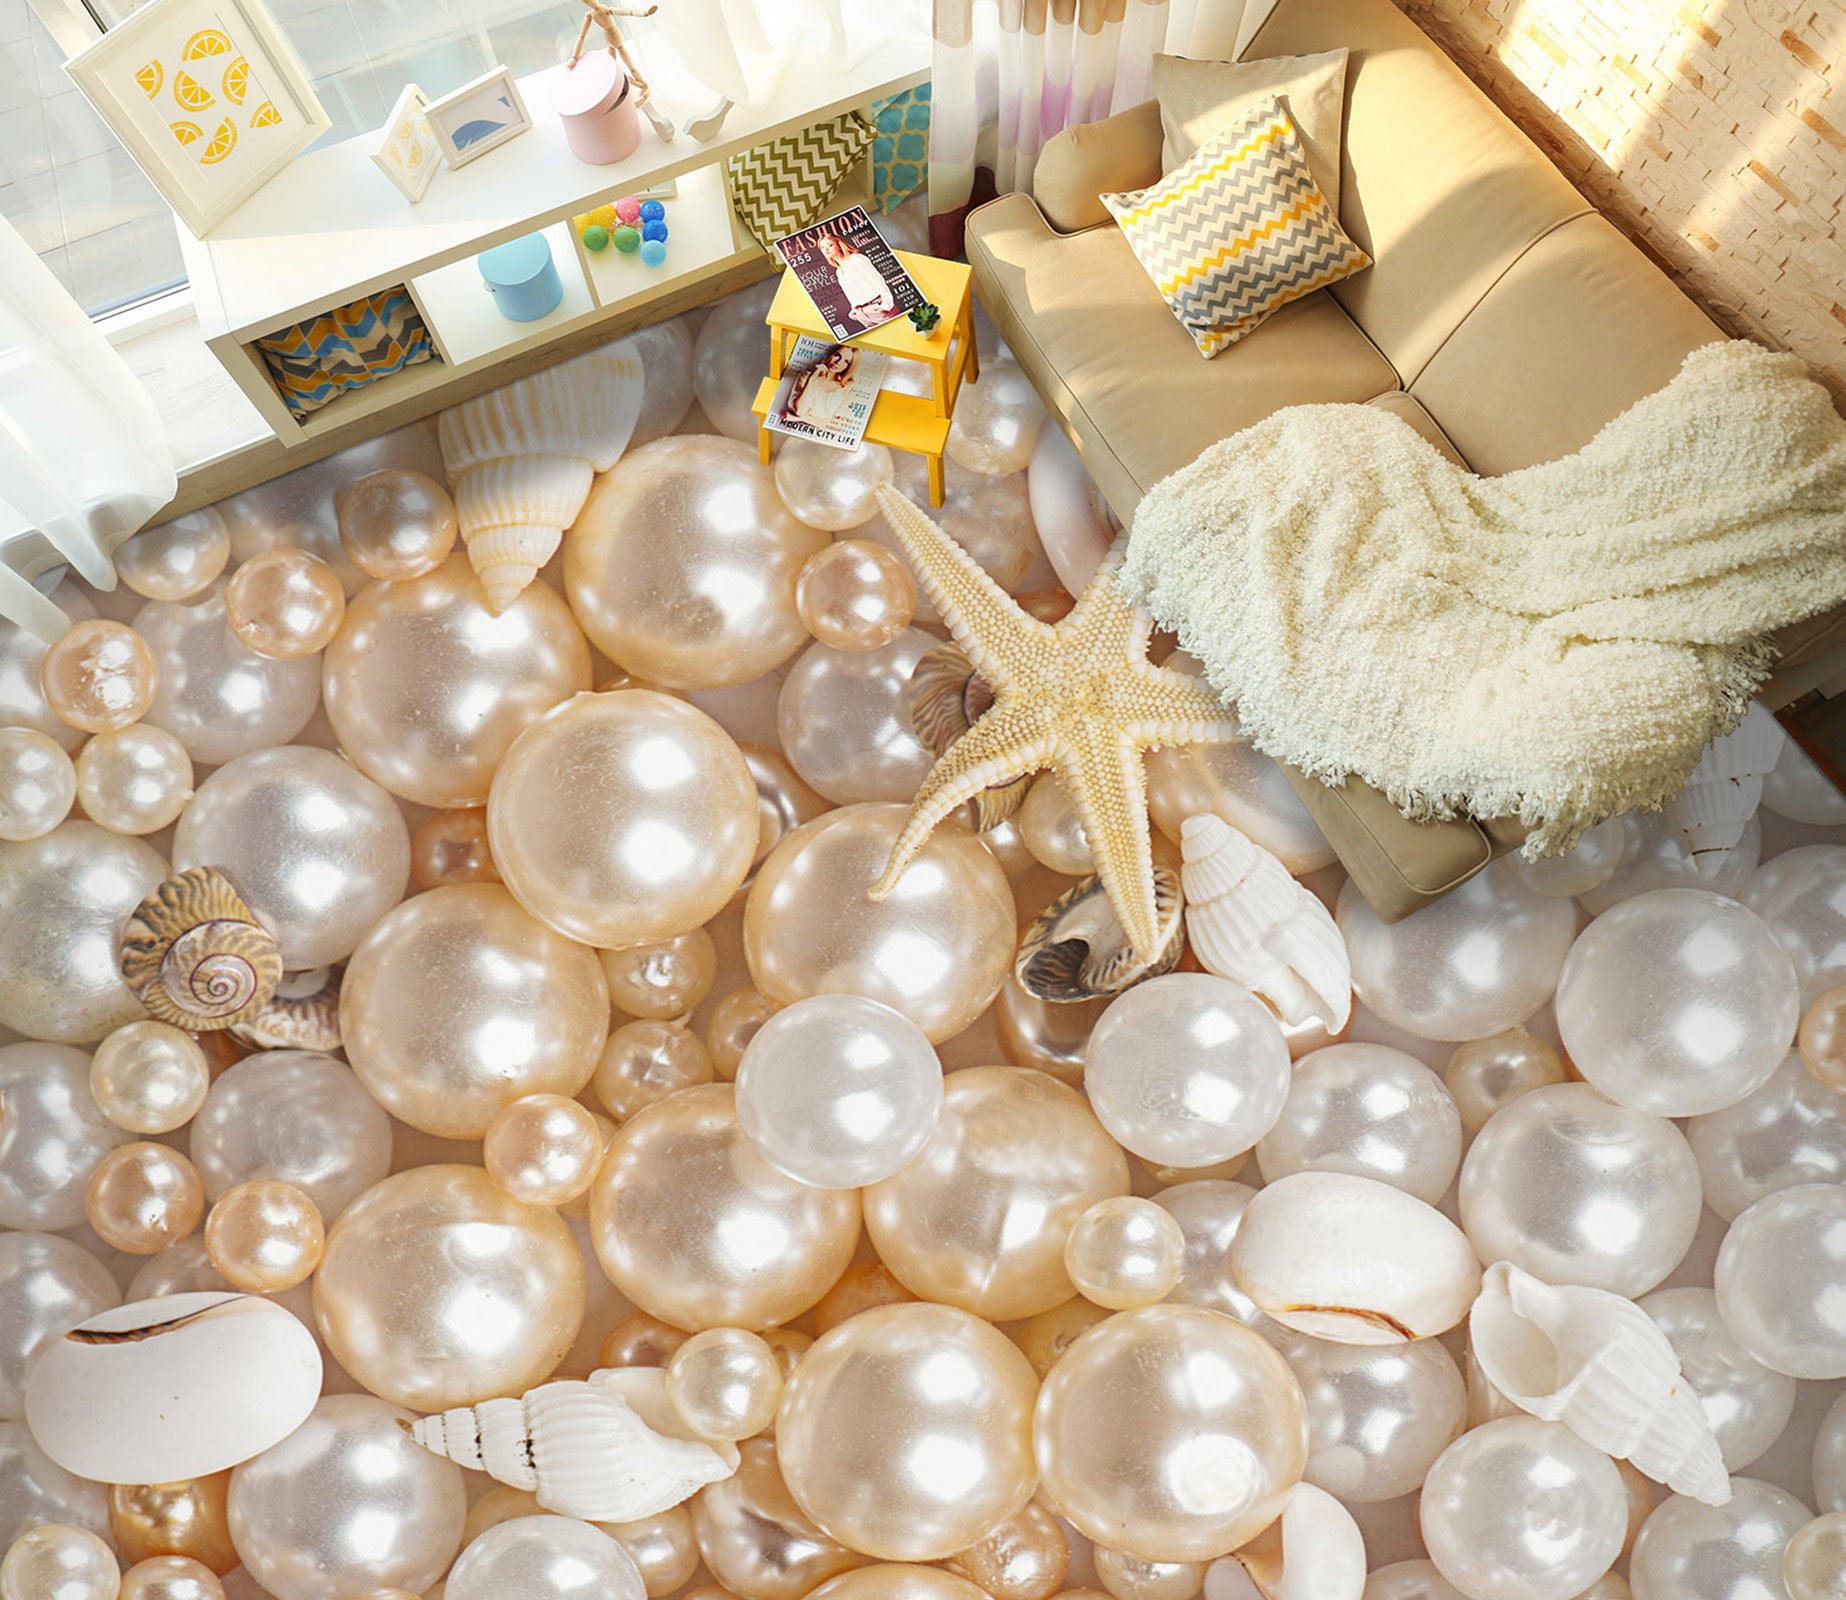 3D Expensive Pearls 1405 Floor Mural  Wallpaper Murals Self-Adhesive Removable Print Epoxy